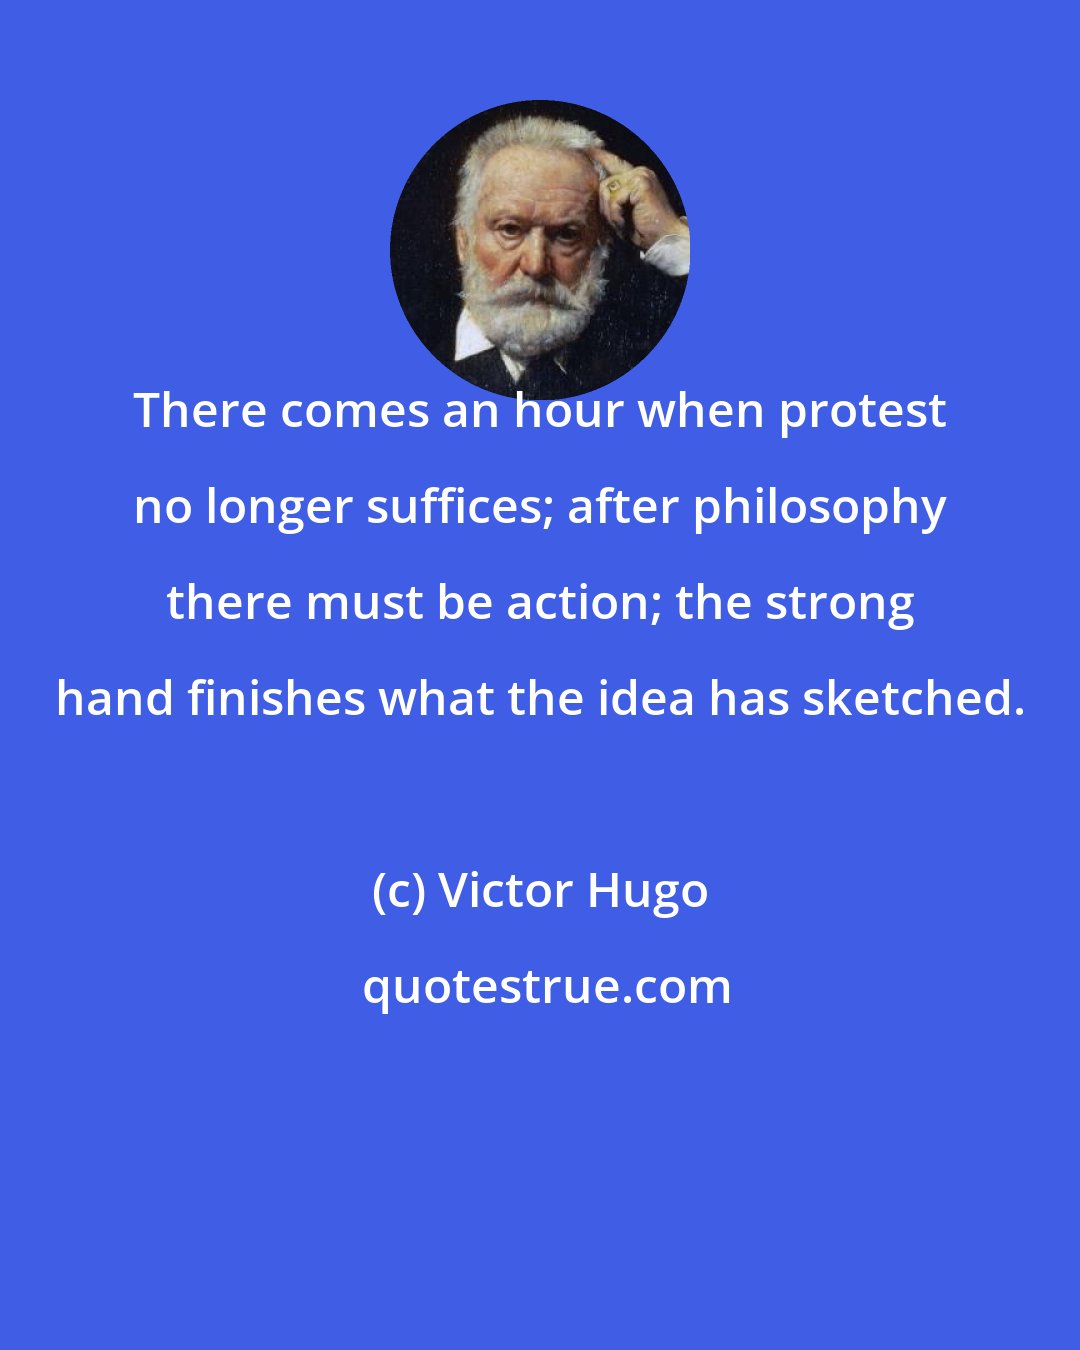 Victor Hugo: There comes an hour when protest no longer suffices; after philosophy there must be action; the strong hand finishes what the idea has sketched.